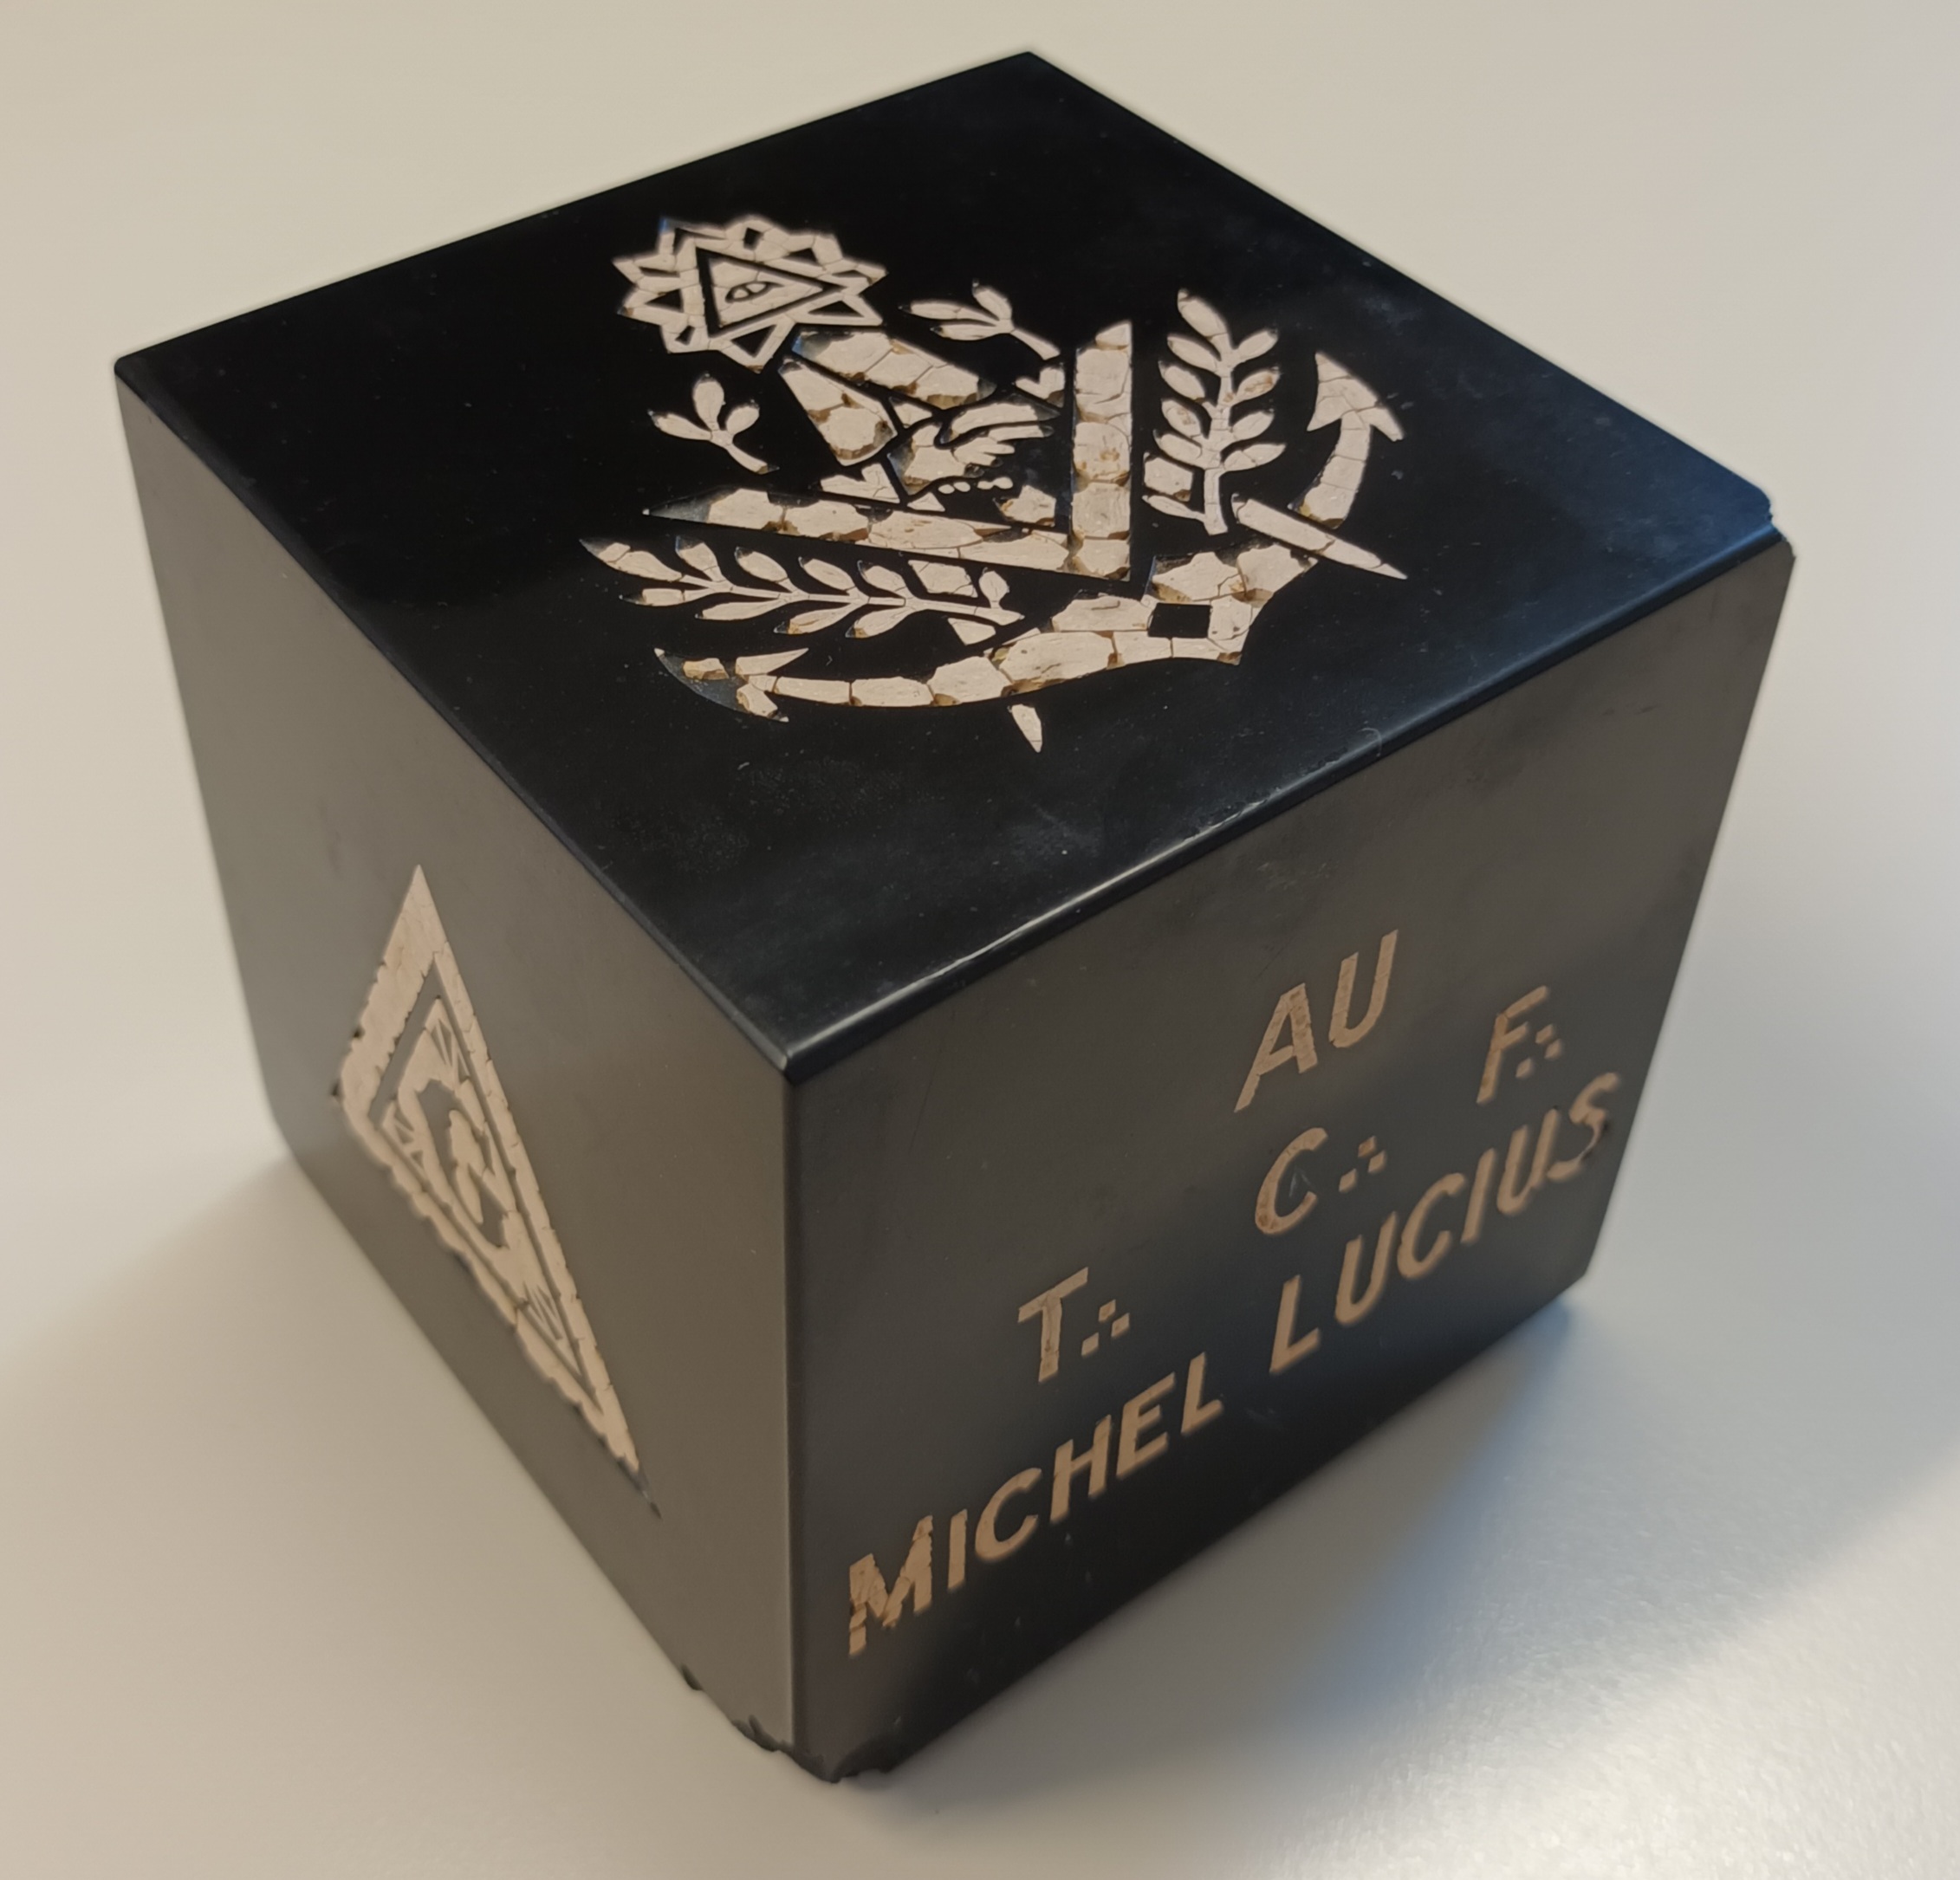 The Freemasons' gift to geologist Michel Lucius,
 1960